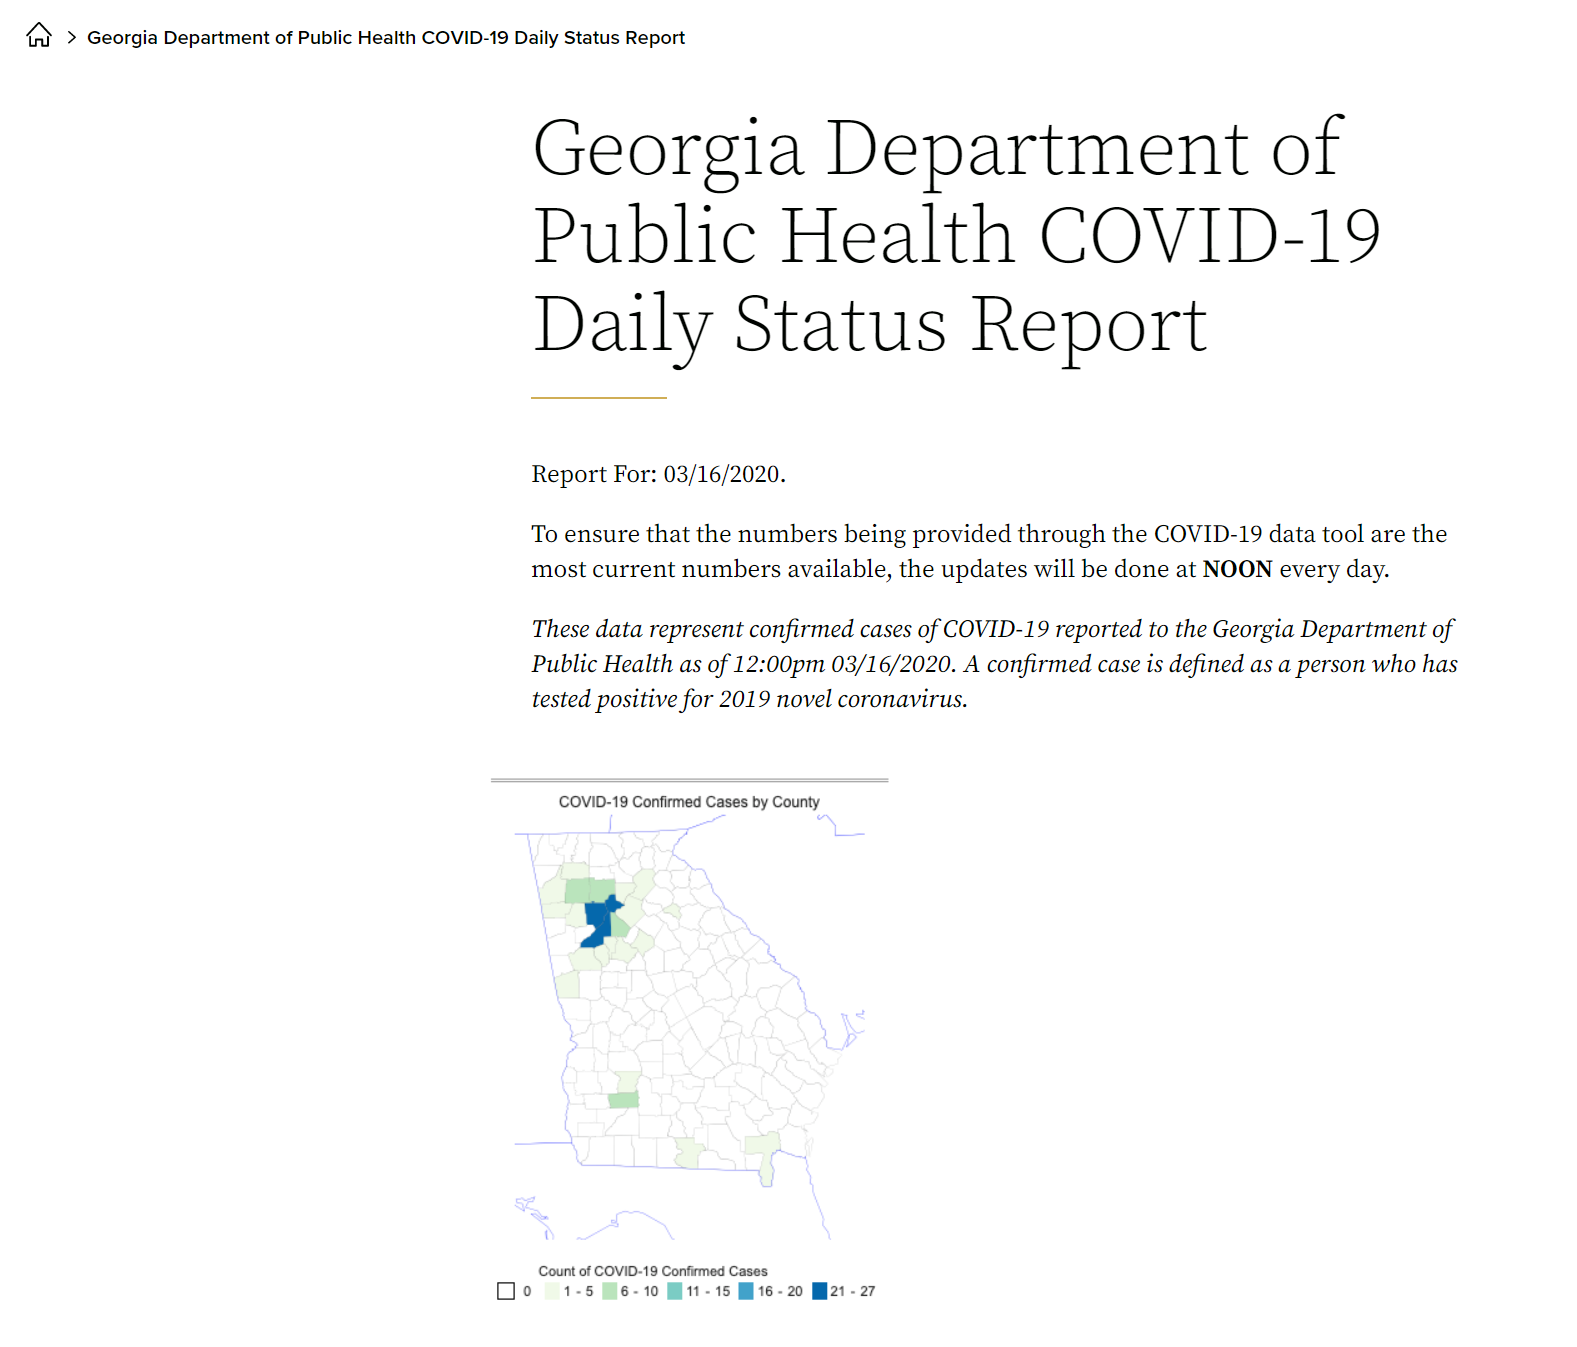 Georgia Department of Health COVID-19 Daily Update Webpage